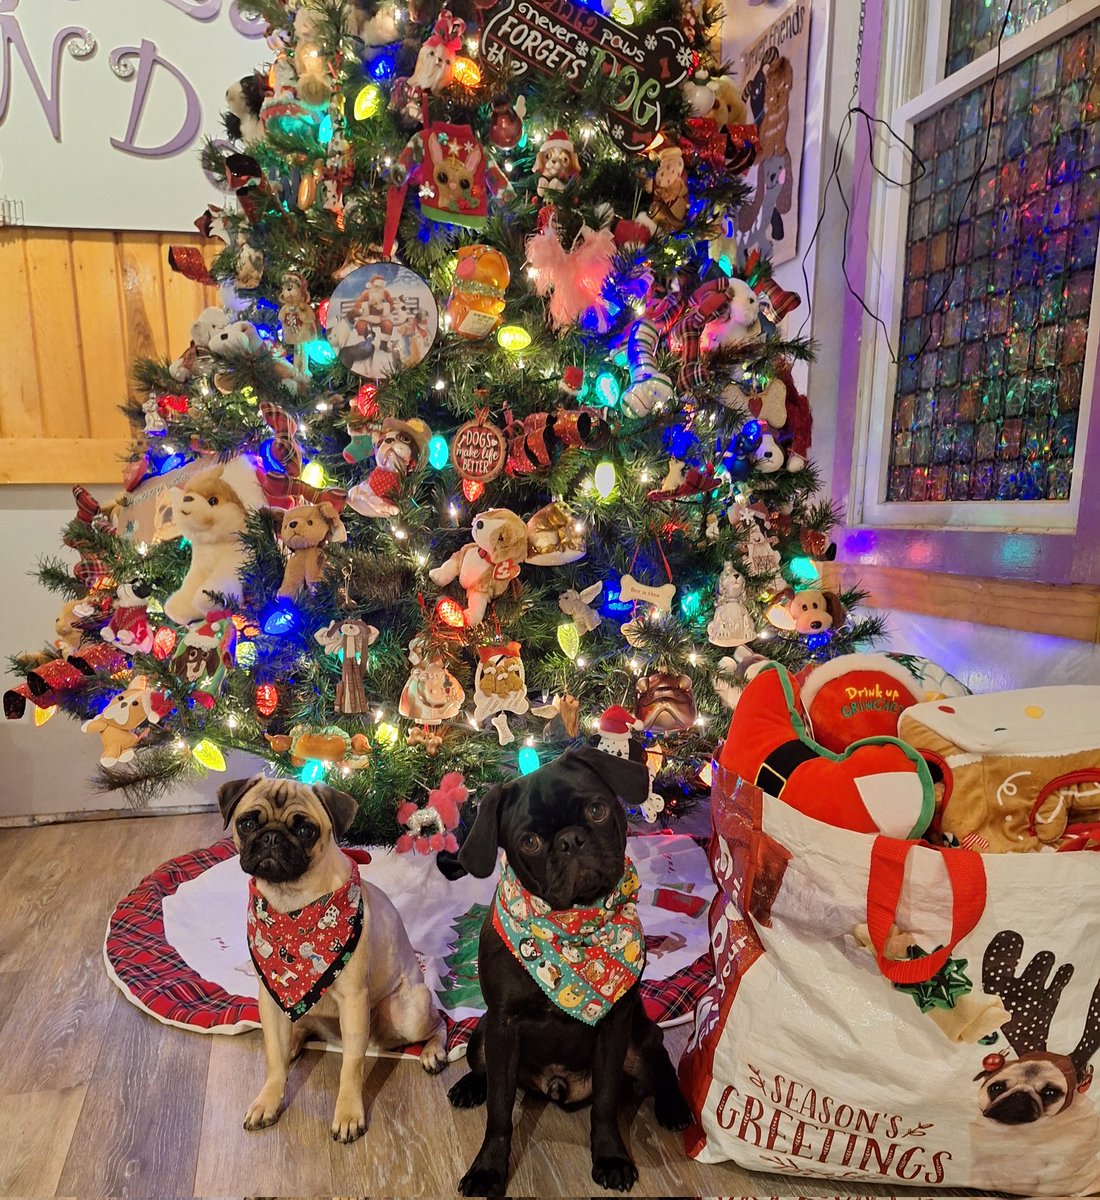 Now we're just pups but what doesn't make sense is that #BuyNothingDay & #BlackFriday are the same day🤔. Happy Friday either way😄! #ShopTillYouDrop #BlackFriday2023 #fridayfun #puglife #dogsoftwitter #dogsofx  #puppiesofx #ChristmasIsComing #Christmas2023 #ChristmasTree #dogs